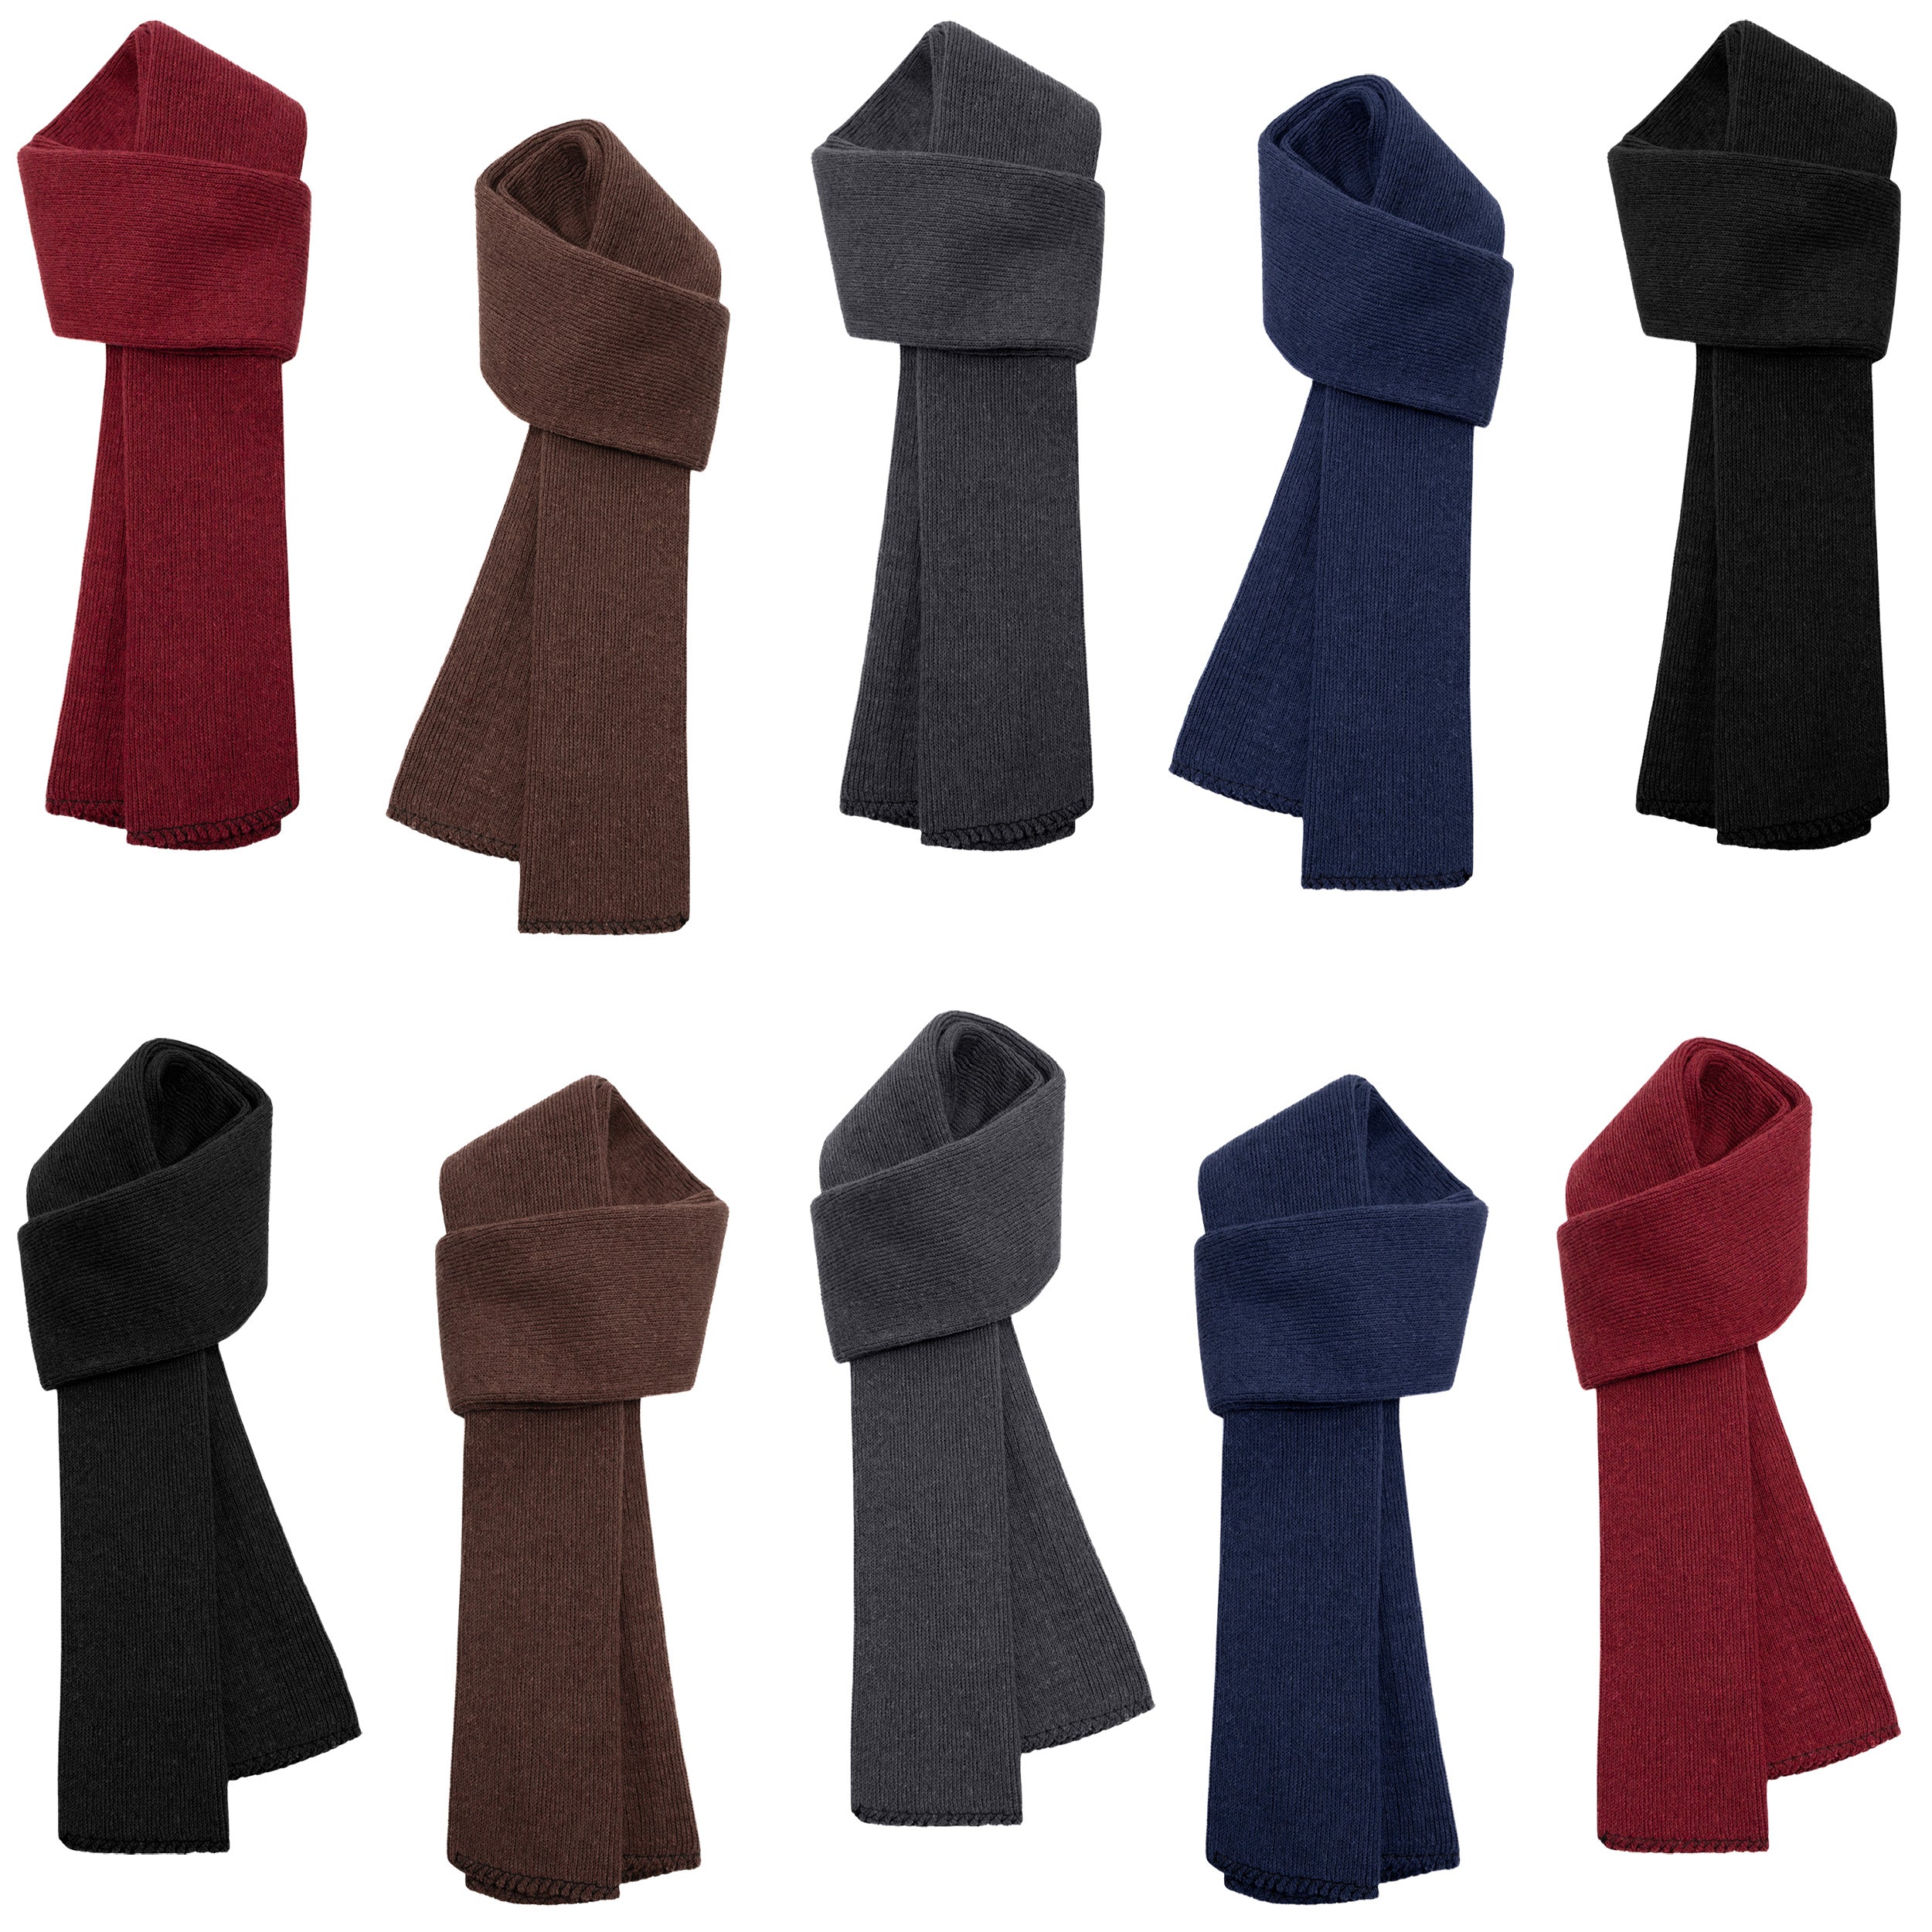 Unisex Wholesale Scarf in 5 Assorted Colors - Bulk Case of 48